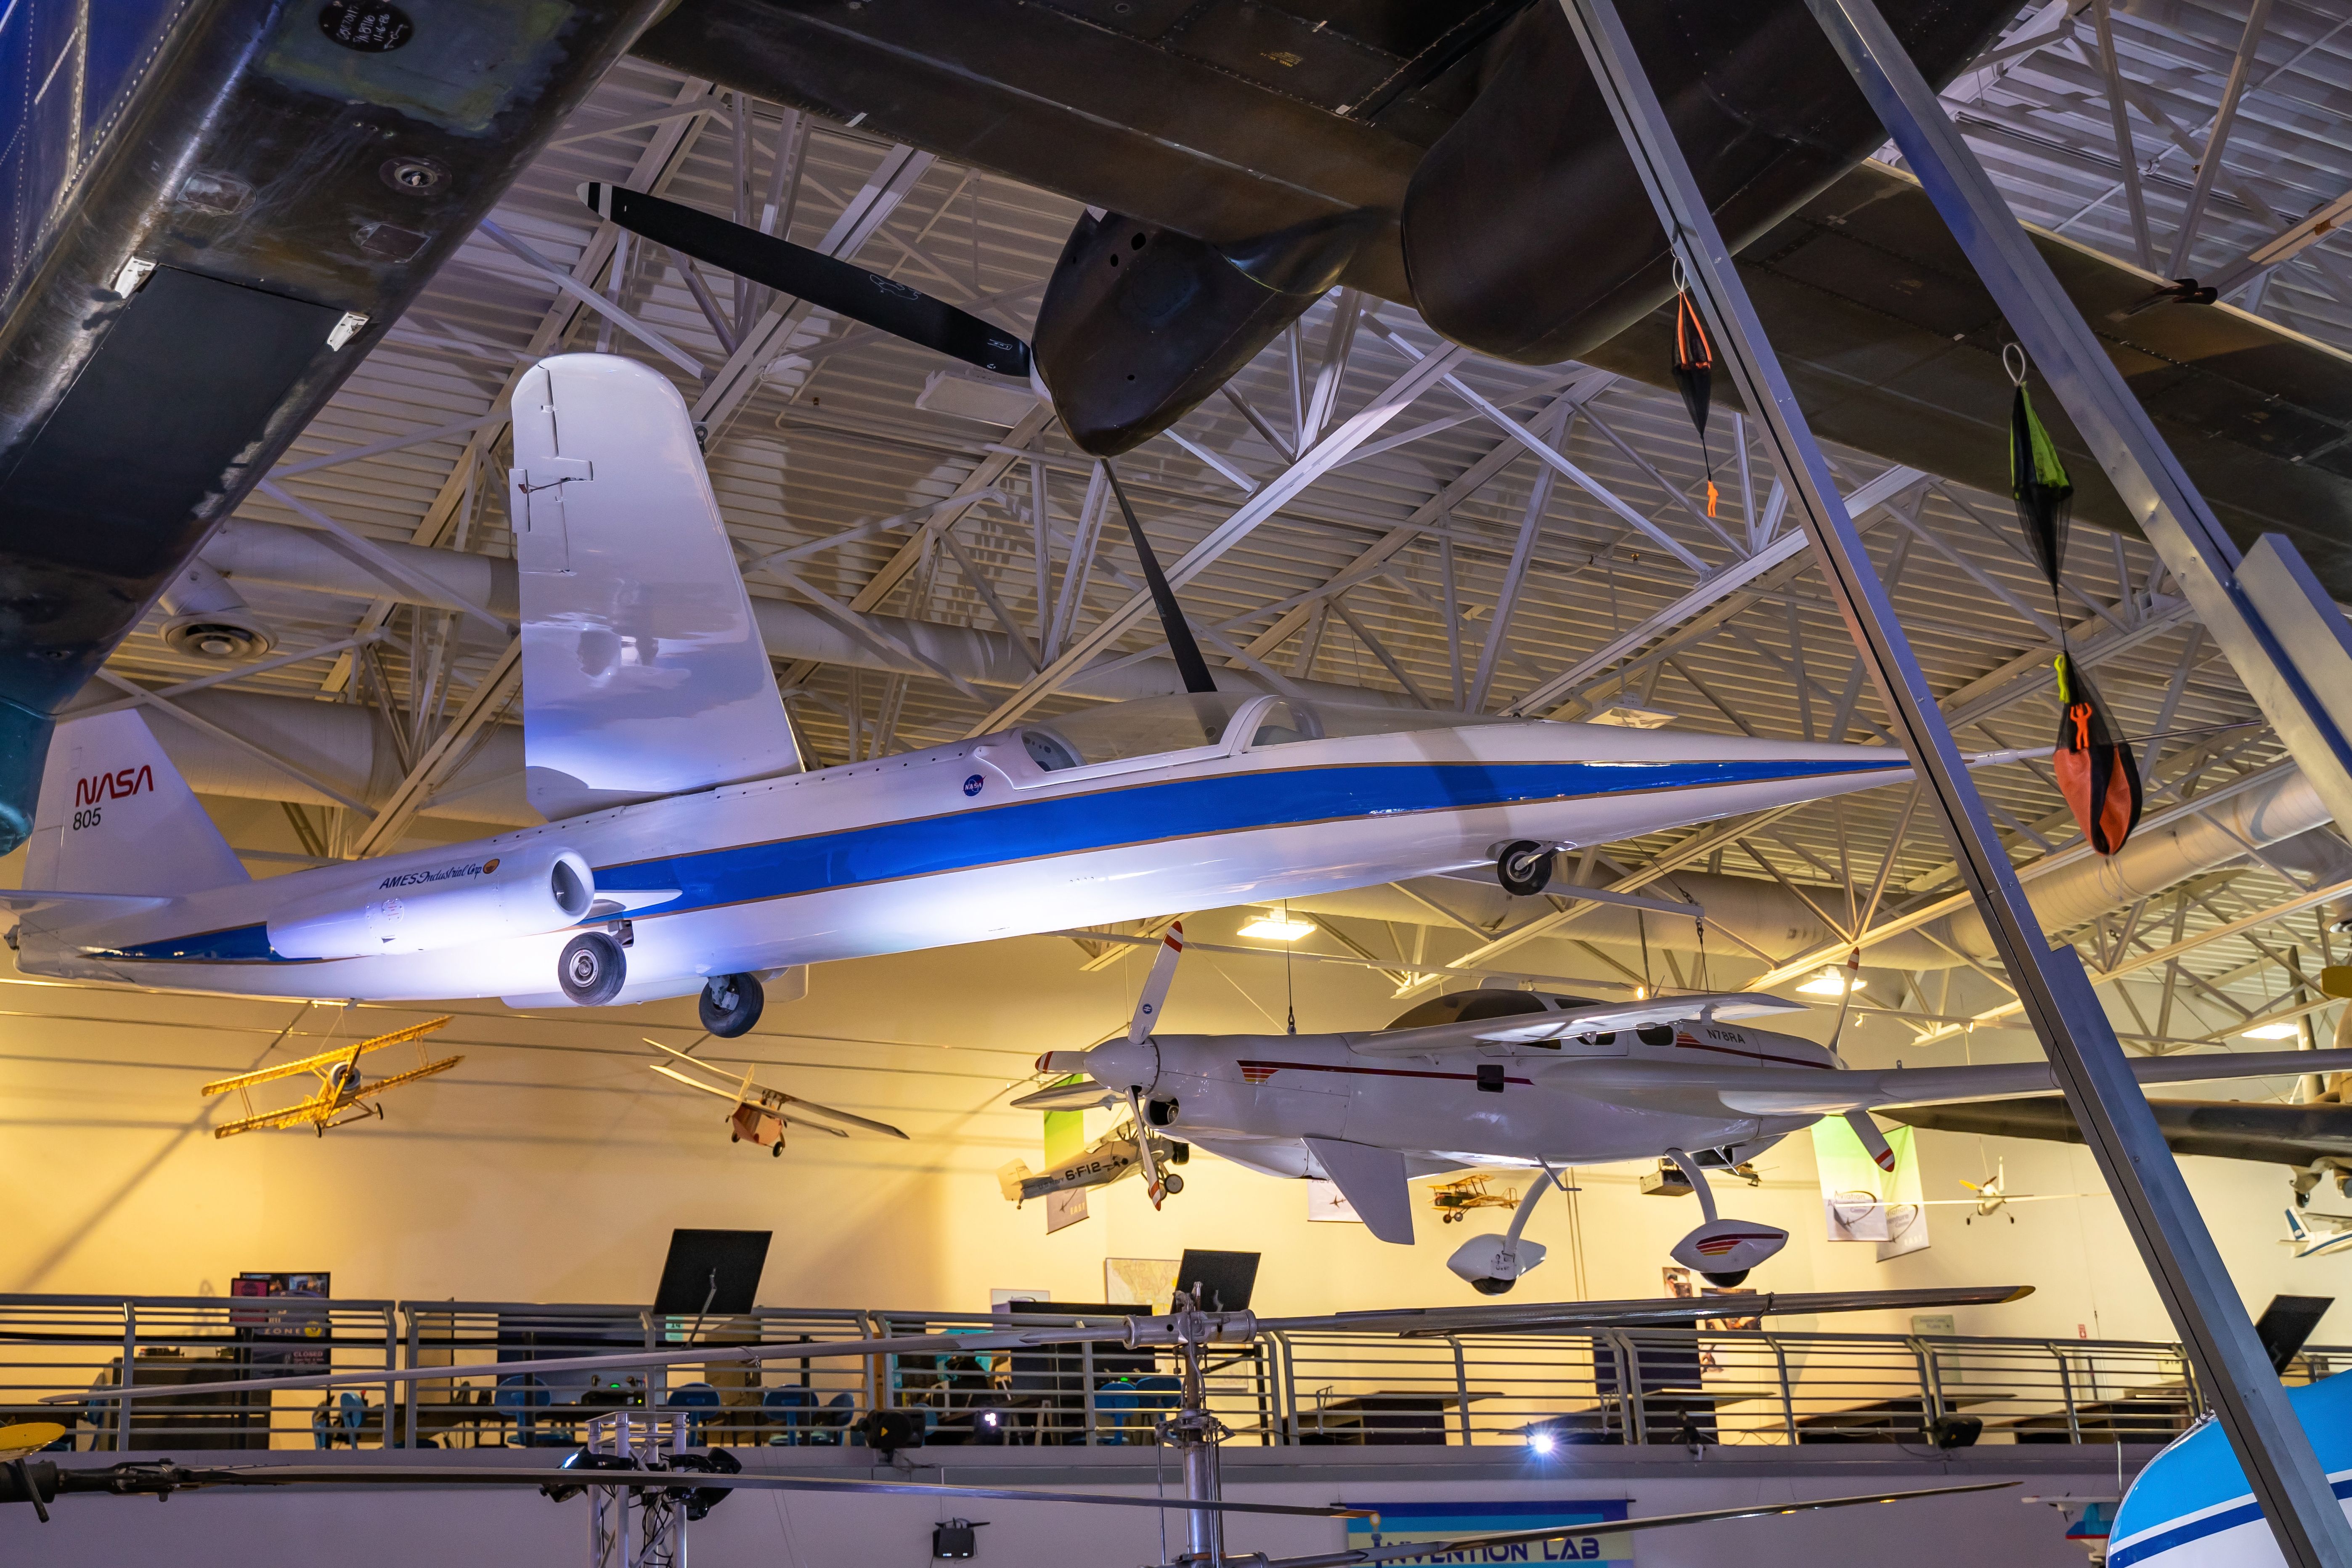 The NASA AD-1 aircraft at the at the Hiller Aviation Museum in California. 